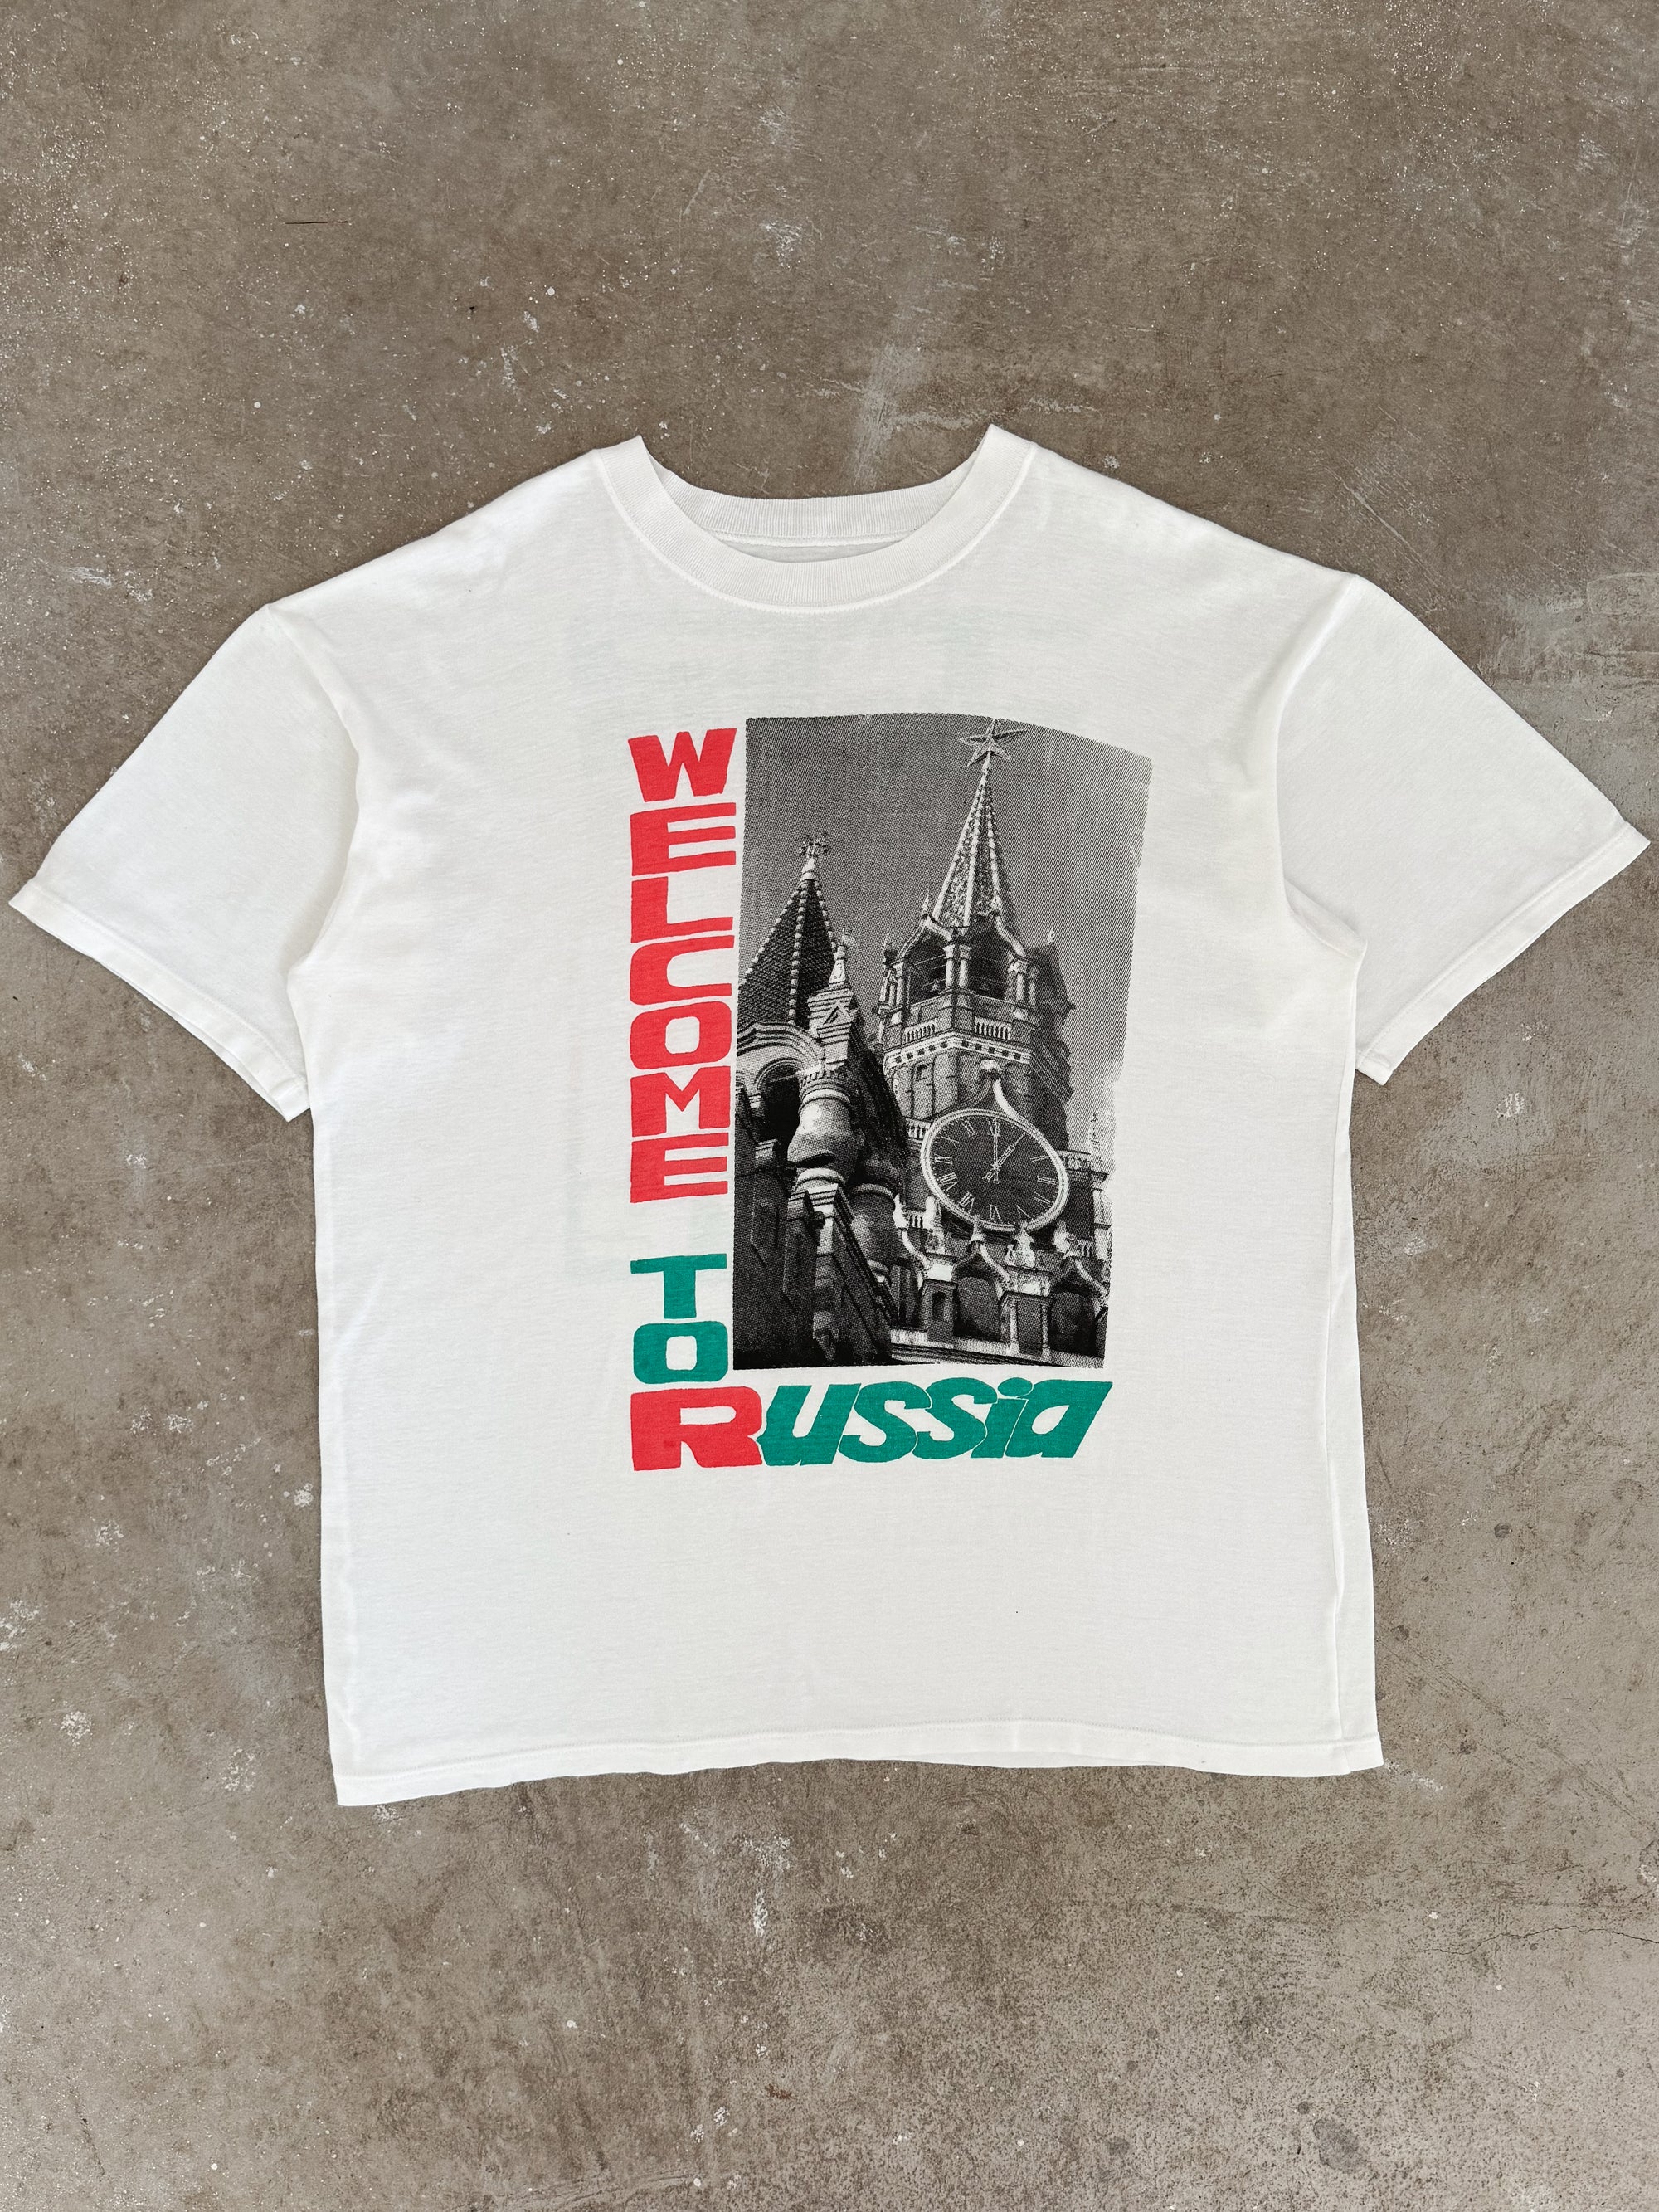 2000s "Welcome To Russia" Tee (XL)